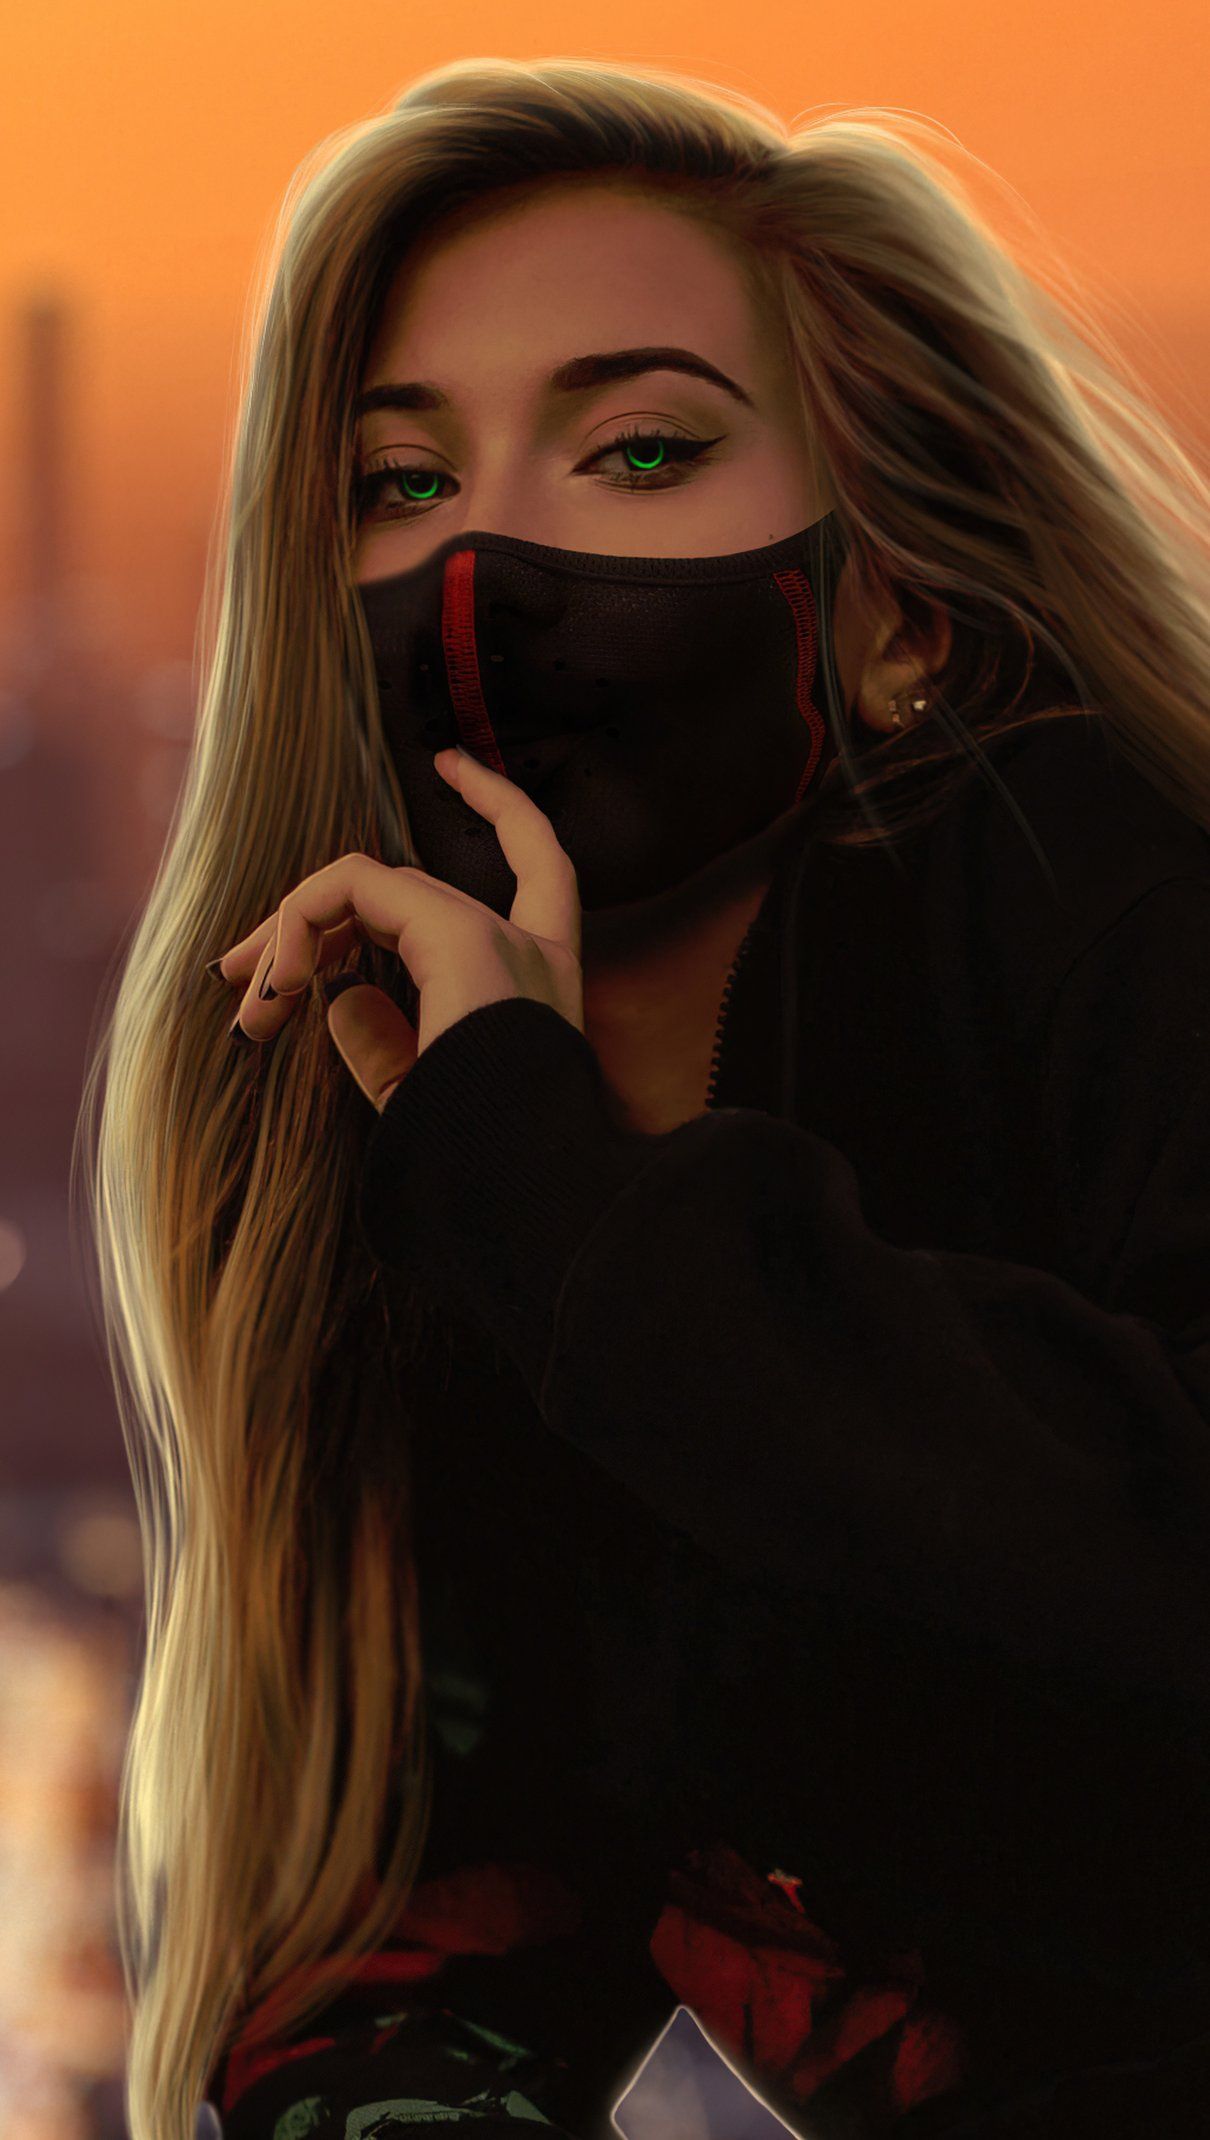 Girl with mask in a city Wallpaper